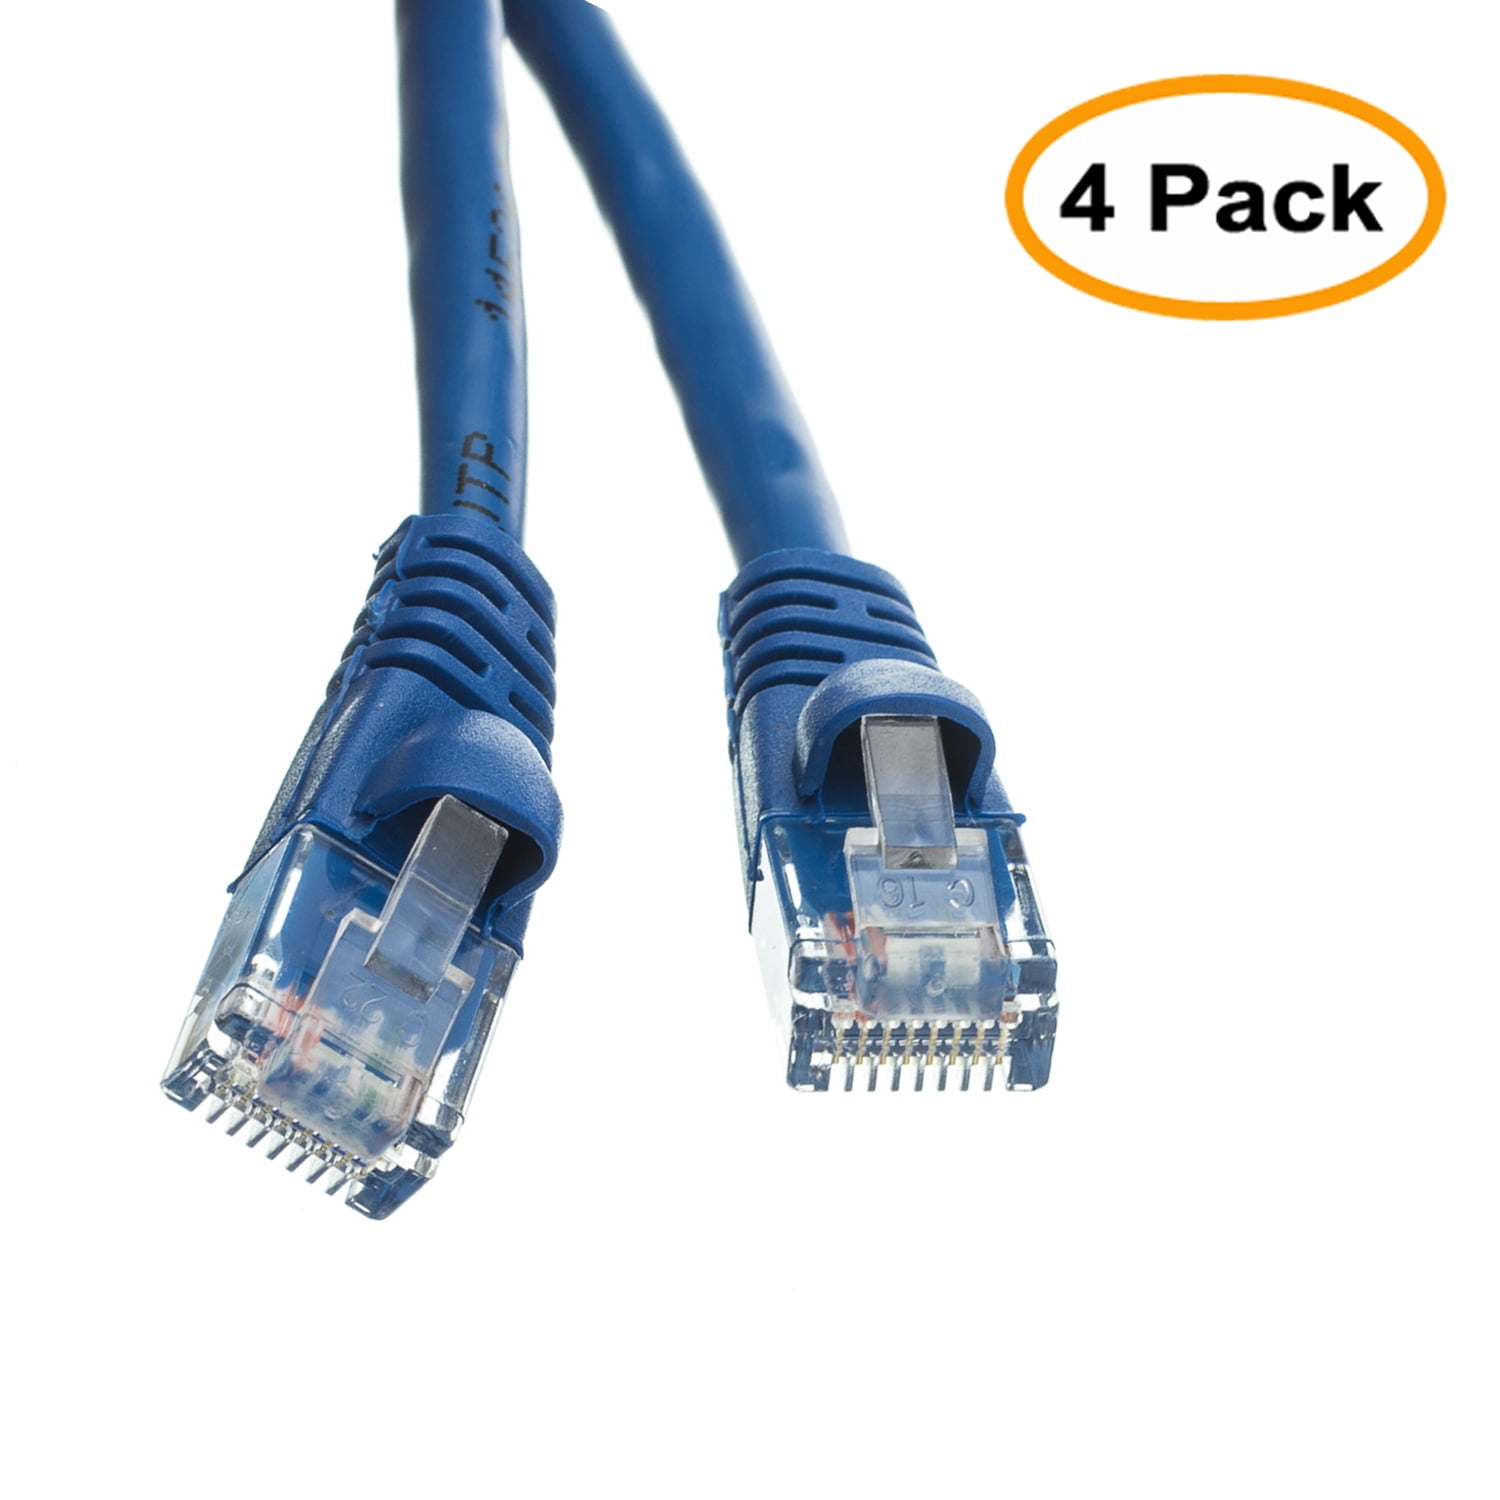 Bootless Cat5e Blue Ethernet Patch Cable 50 Foot